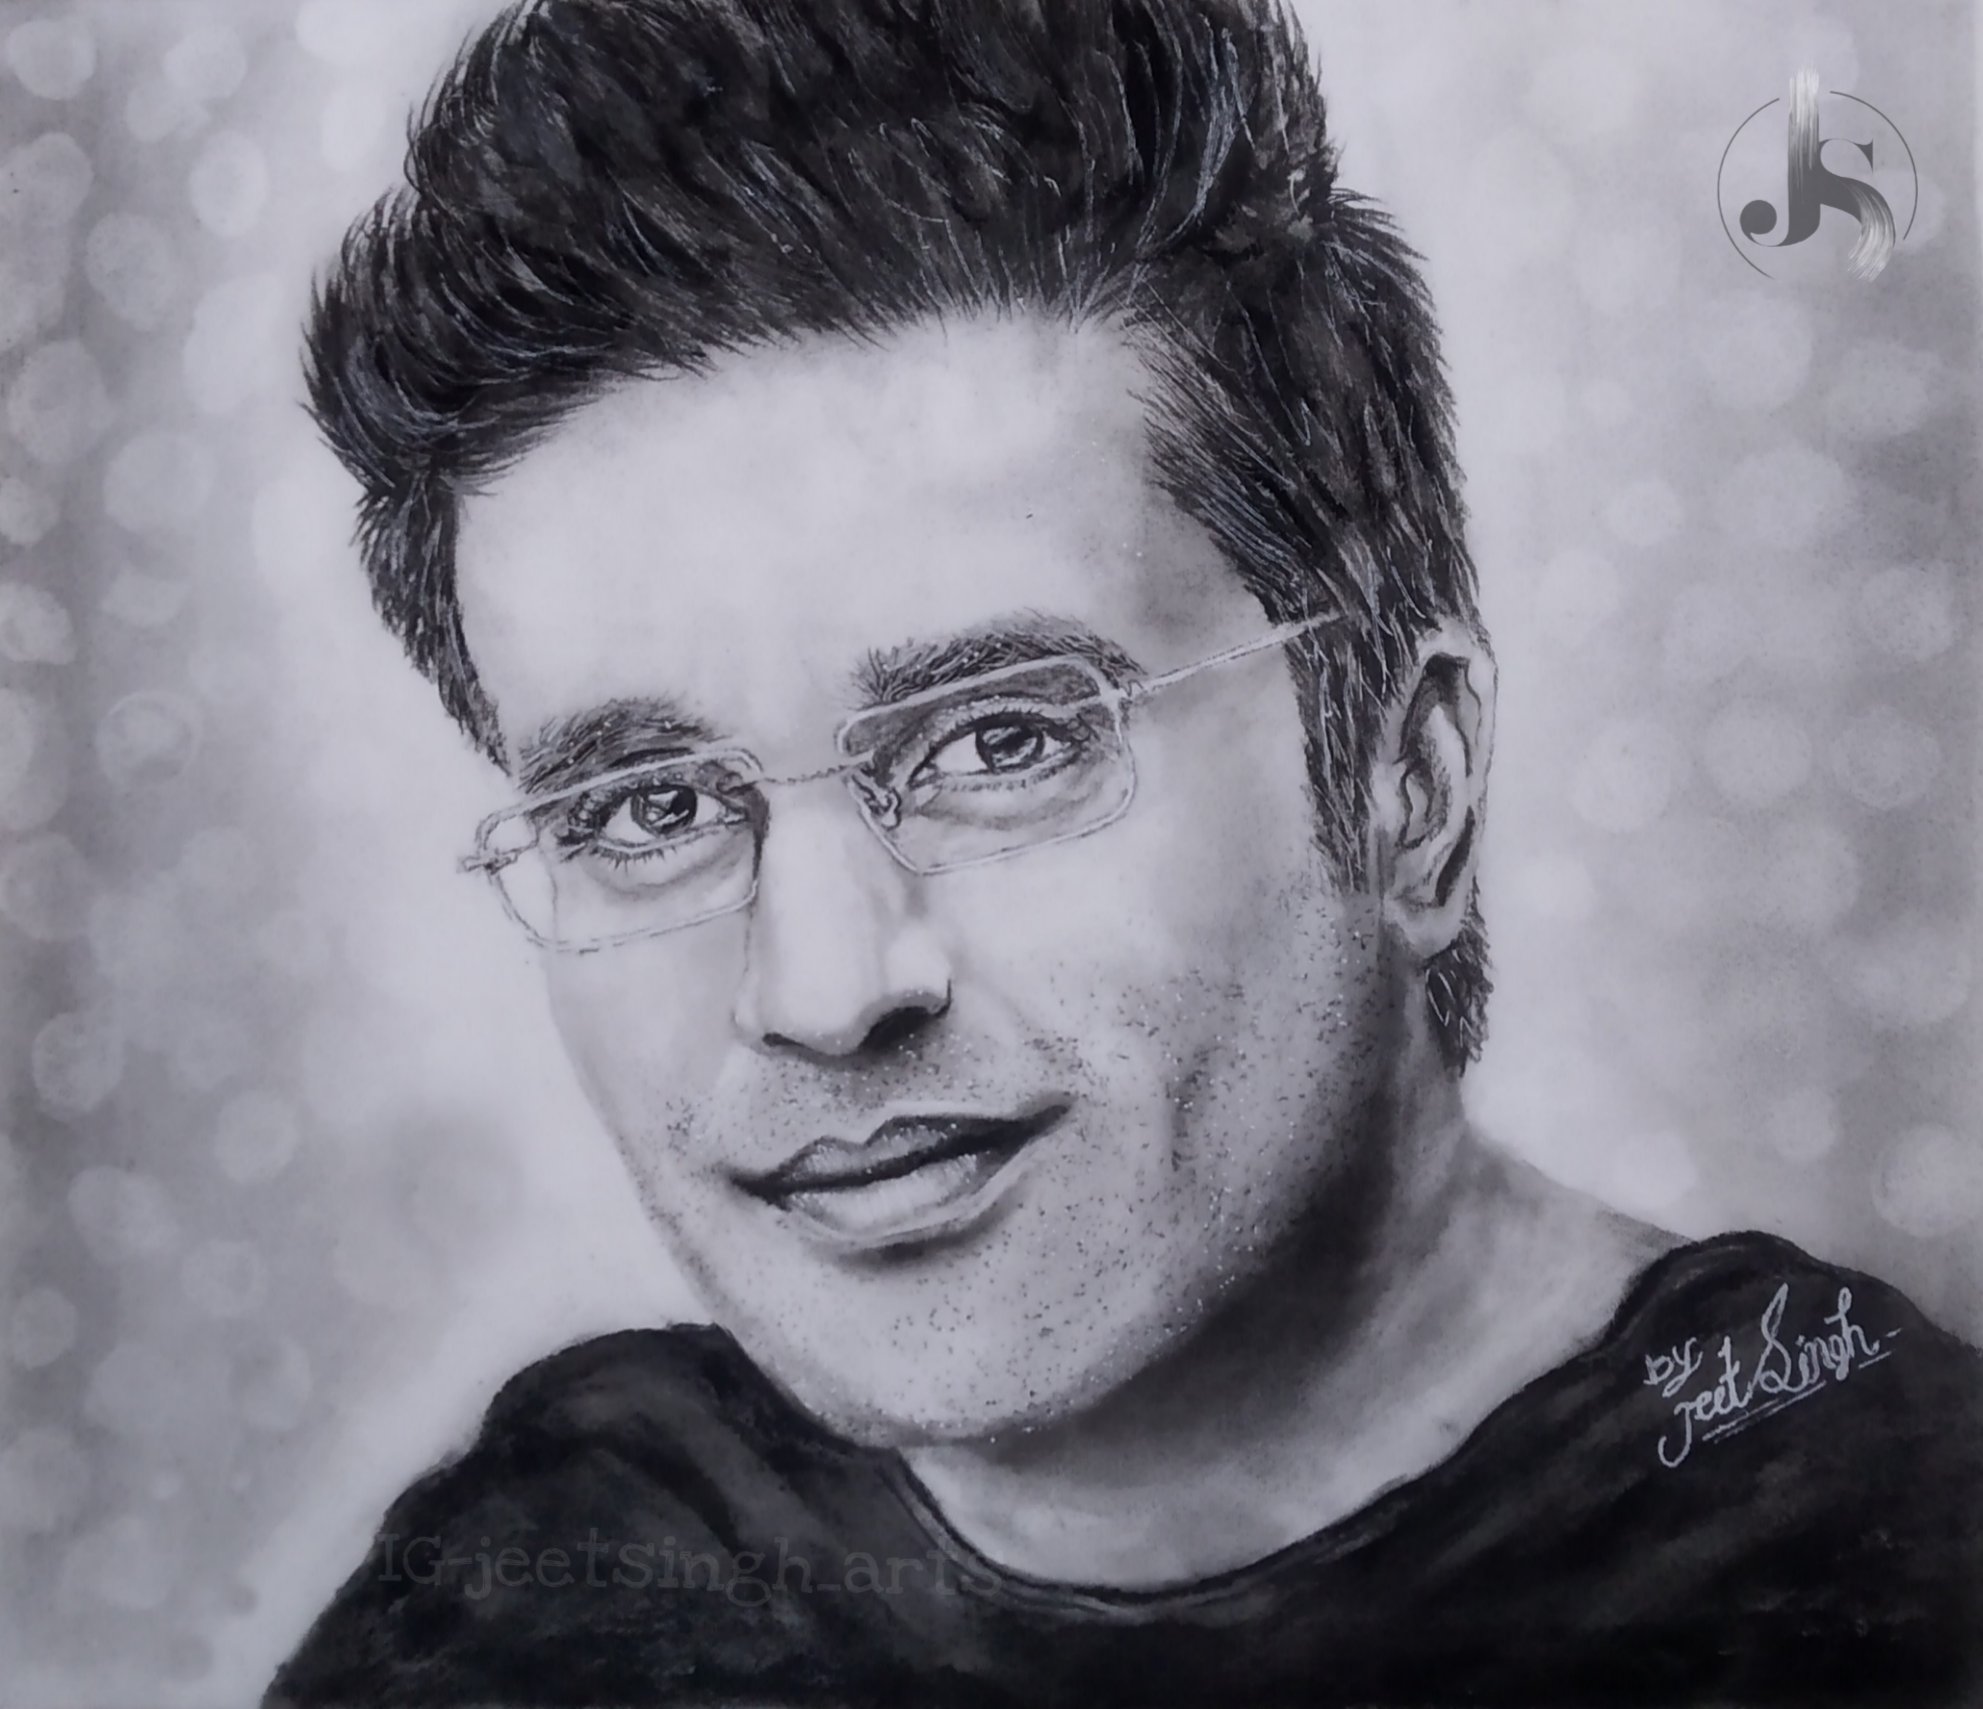 Anant Lahase Art  Drawing of Sandeep Maheshwari Sandeep Maheshwari is a  name among millions who struggled failed and surged ahead in search of  success happiness and contentment Just like any middle